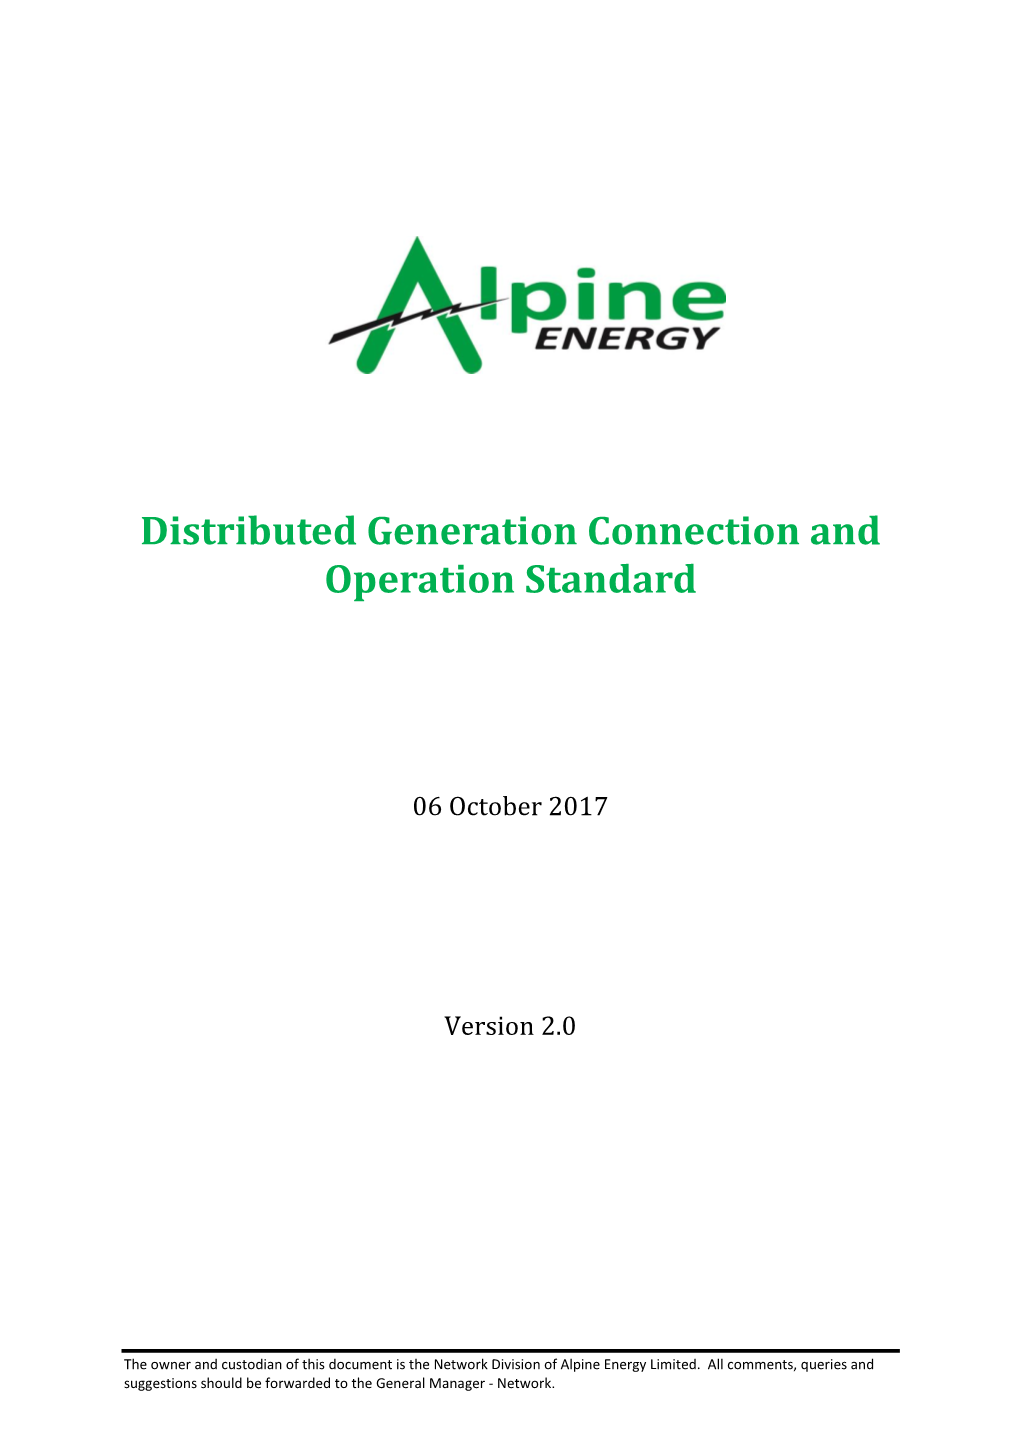 Distributed Generation Connection and Operation Standard